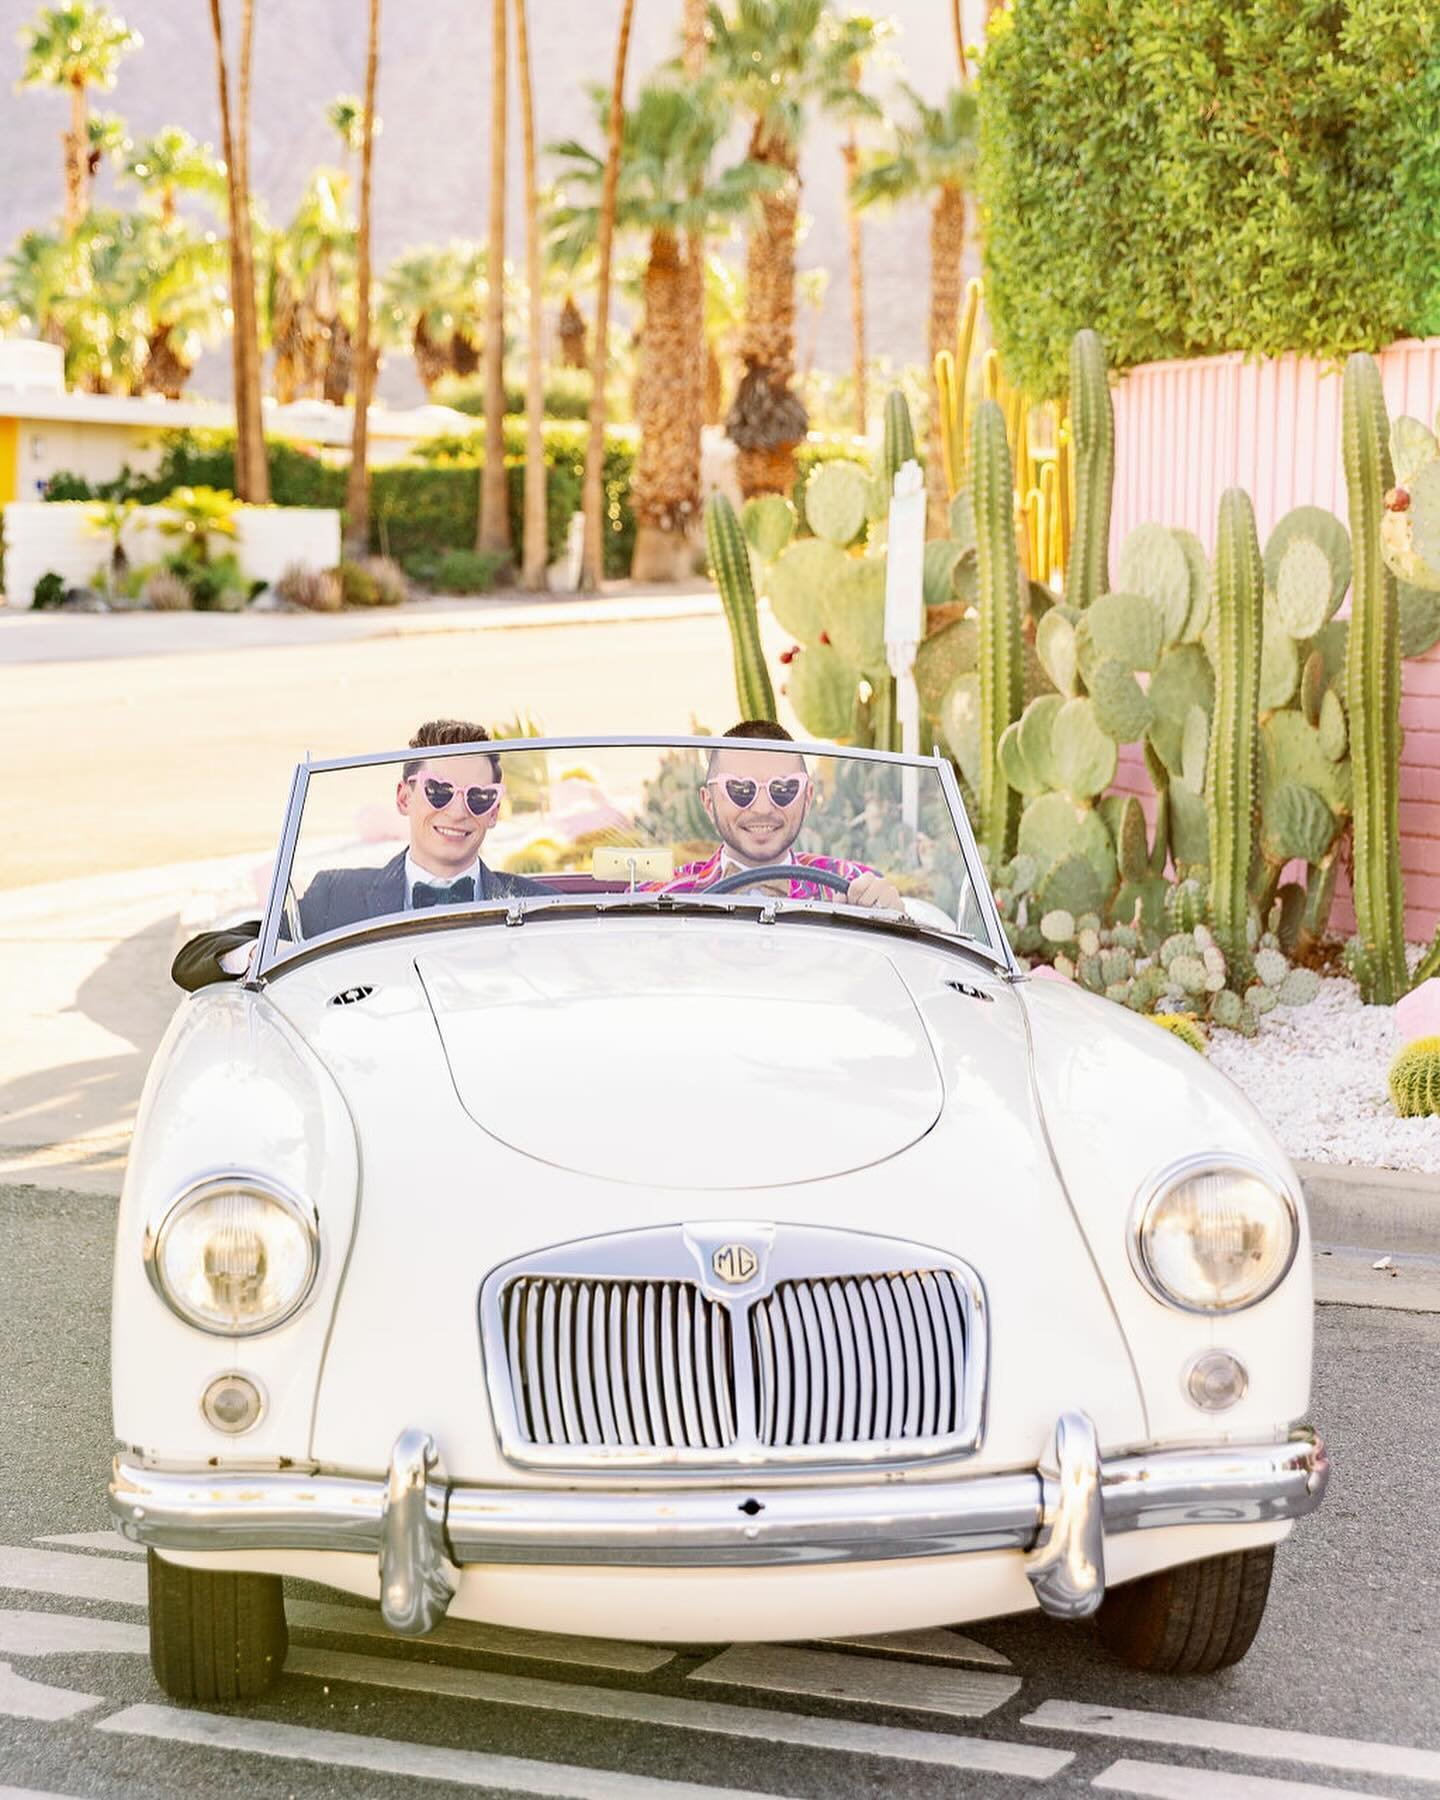 Events by Frank is here to help couples drive off into the sunset hand-in-hand. We&rsquo;ll take care of the wedding day, you take the wheel from there!

Planning and Design: @eventsbyfrank
Venue and Sunglasses: @trixiemotel
Photographer: @ashleylapr